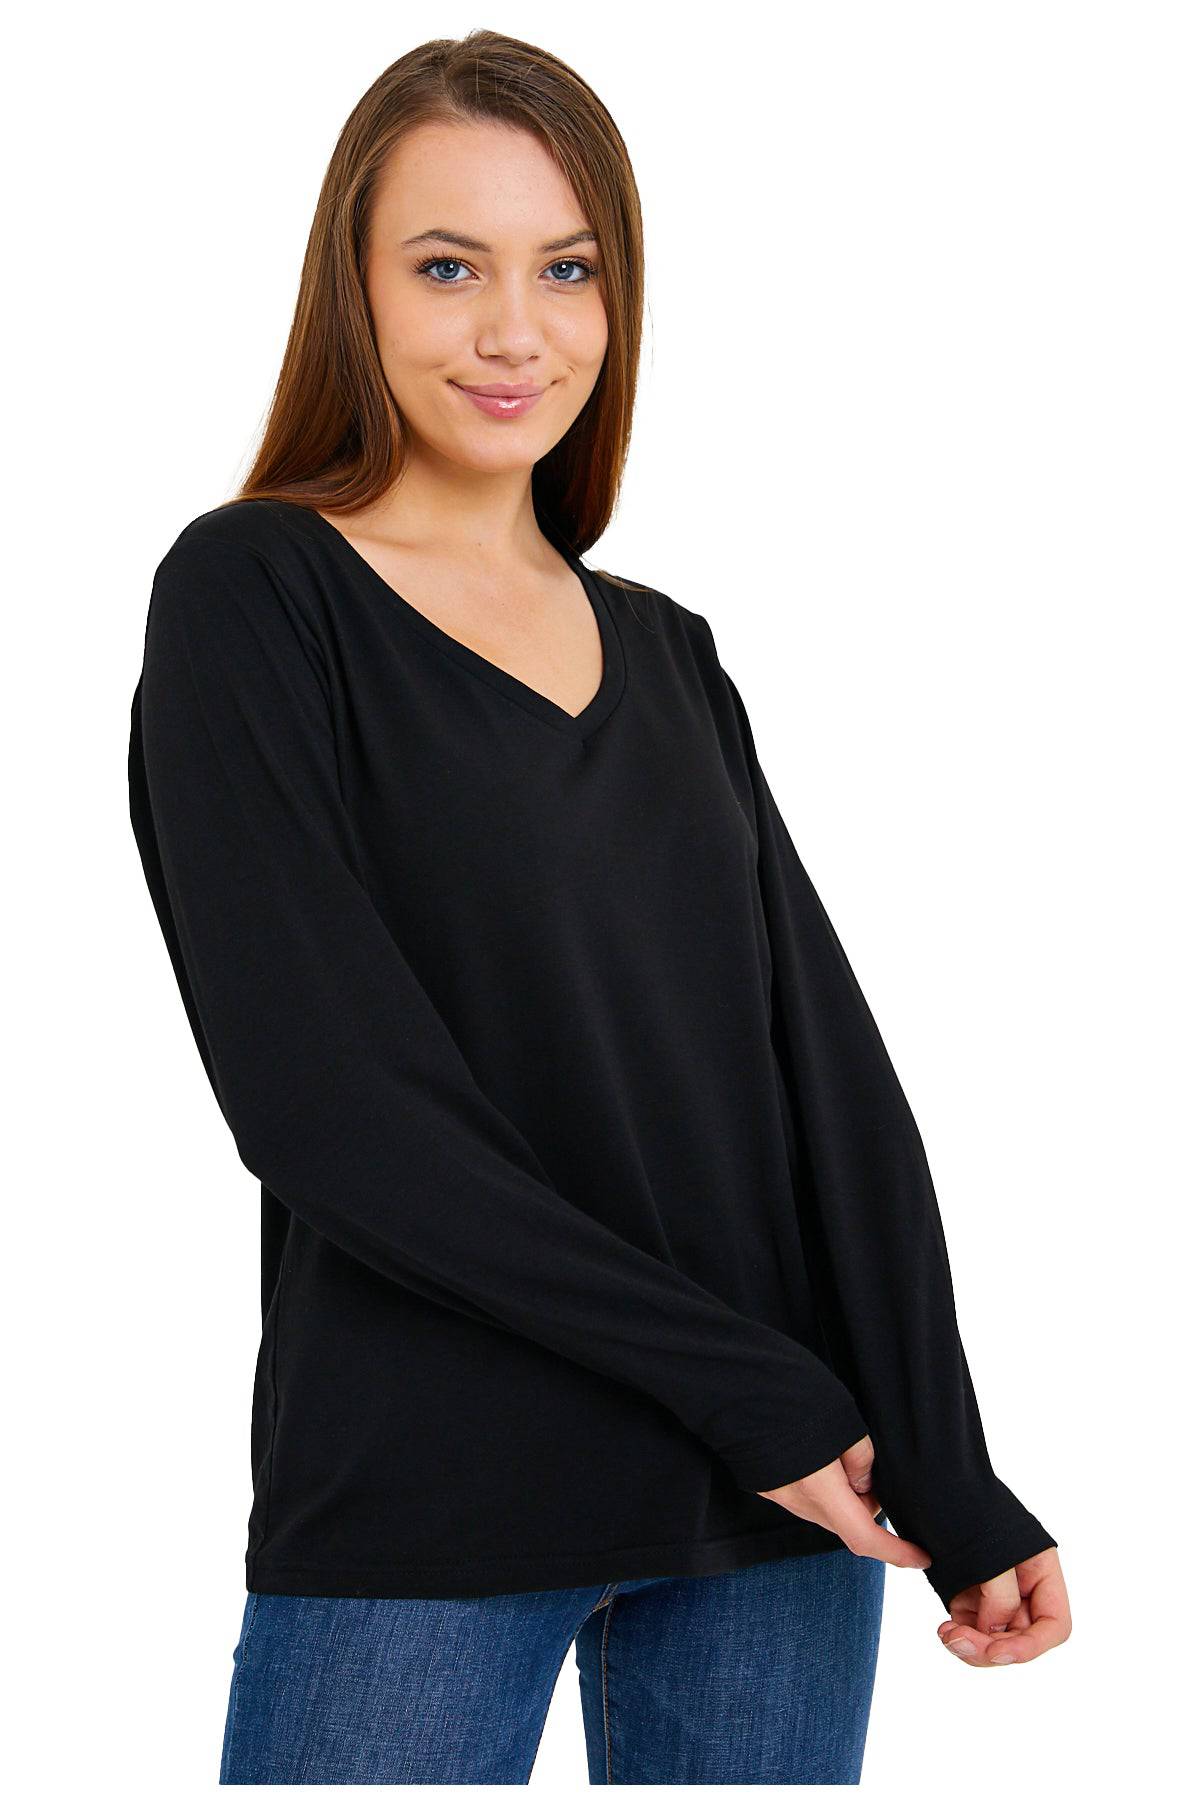 Women's Cotton Long Sleeve Shirts and Tops